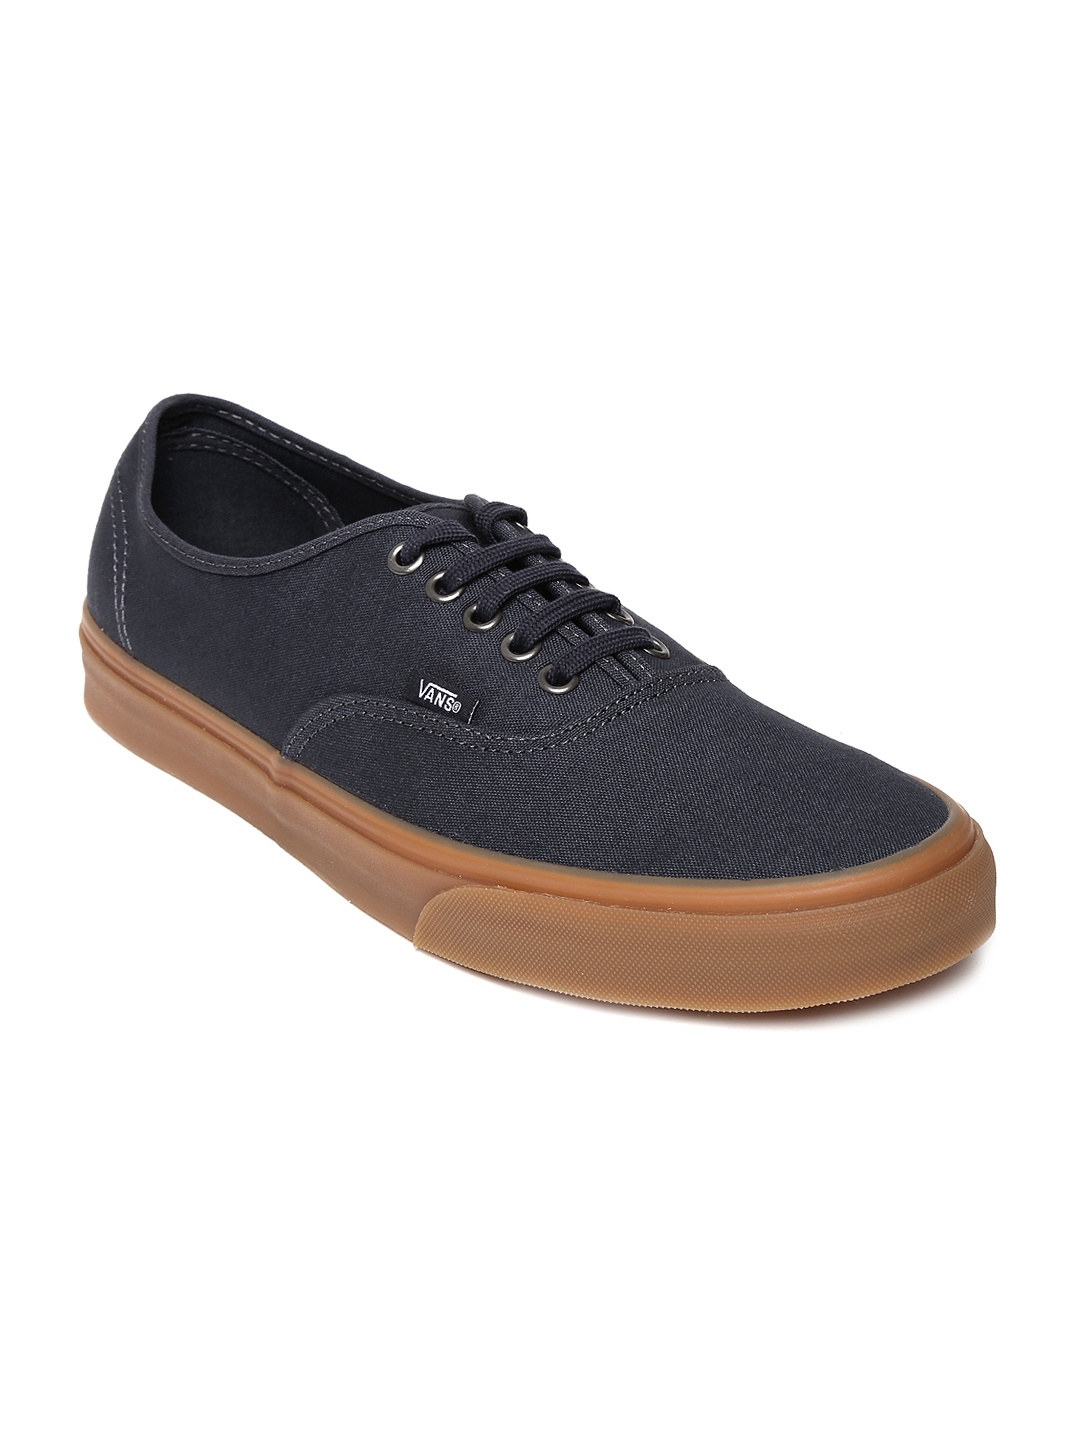 Buy Vans Unisex Navy Casual Shoes - Casual Shoes for Unisex 552318 | Myntra